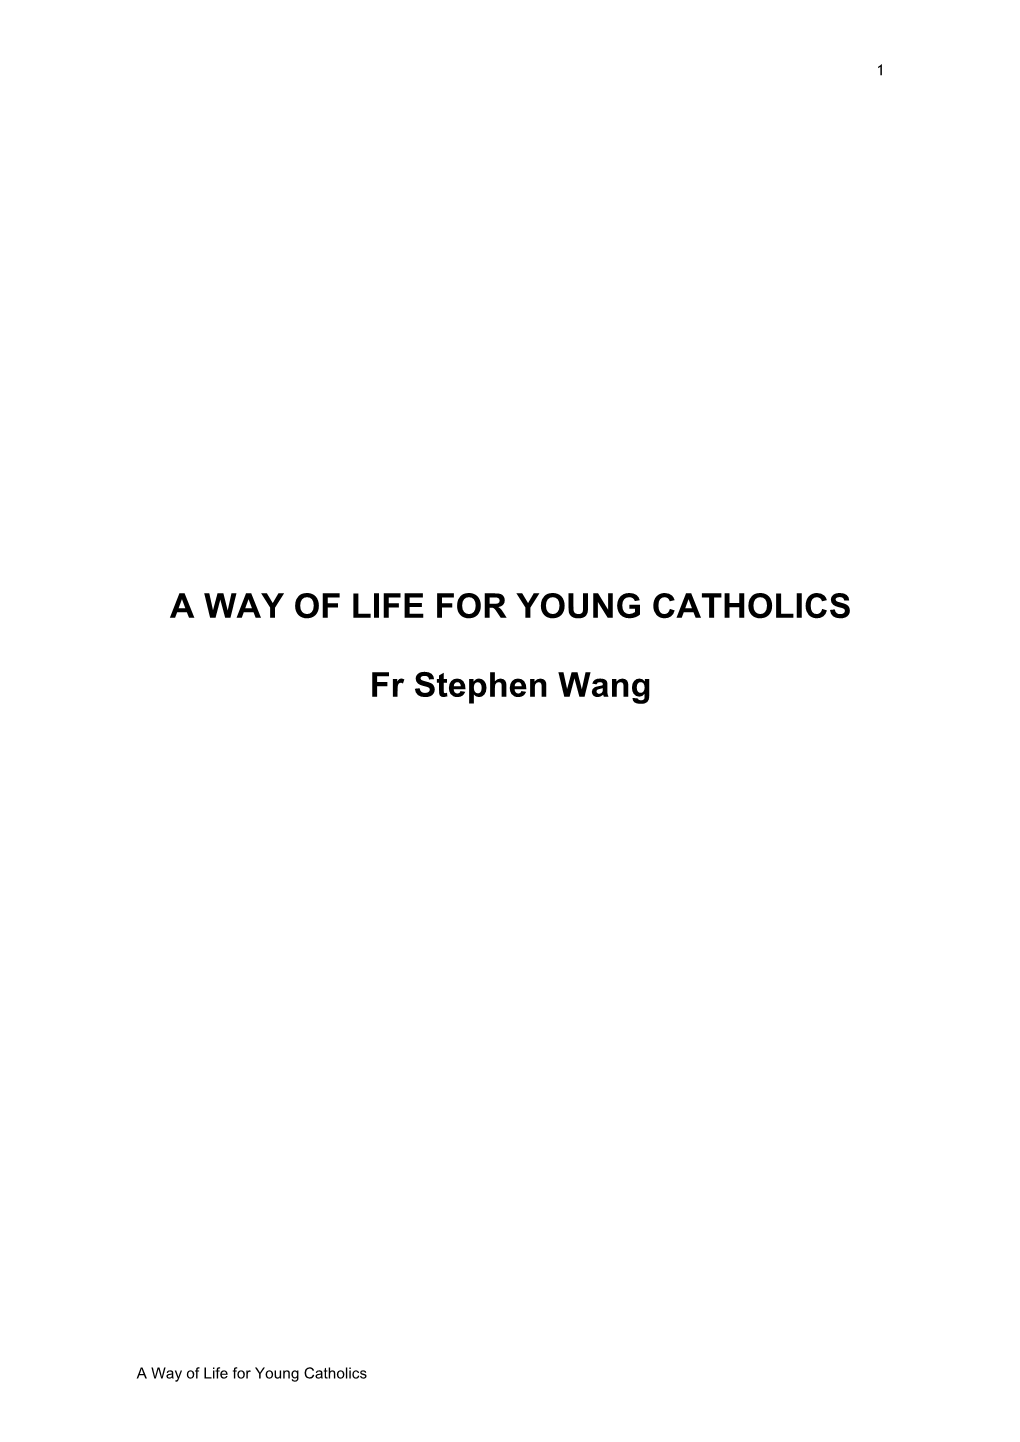 A Way of Life for Young Catholics